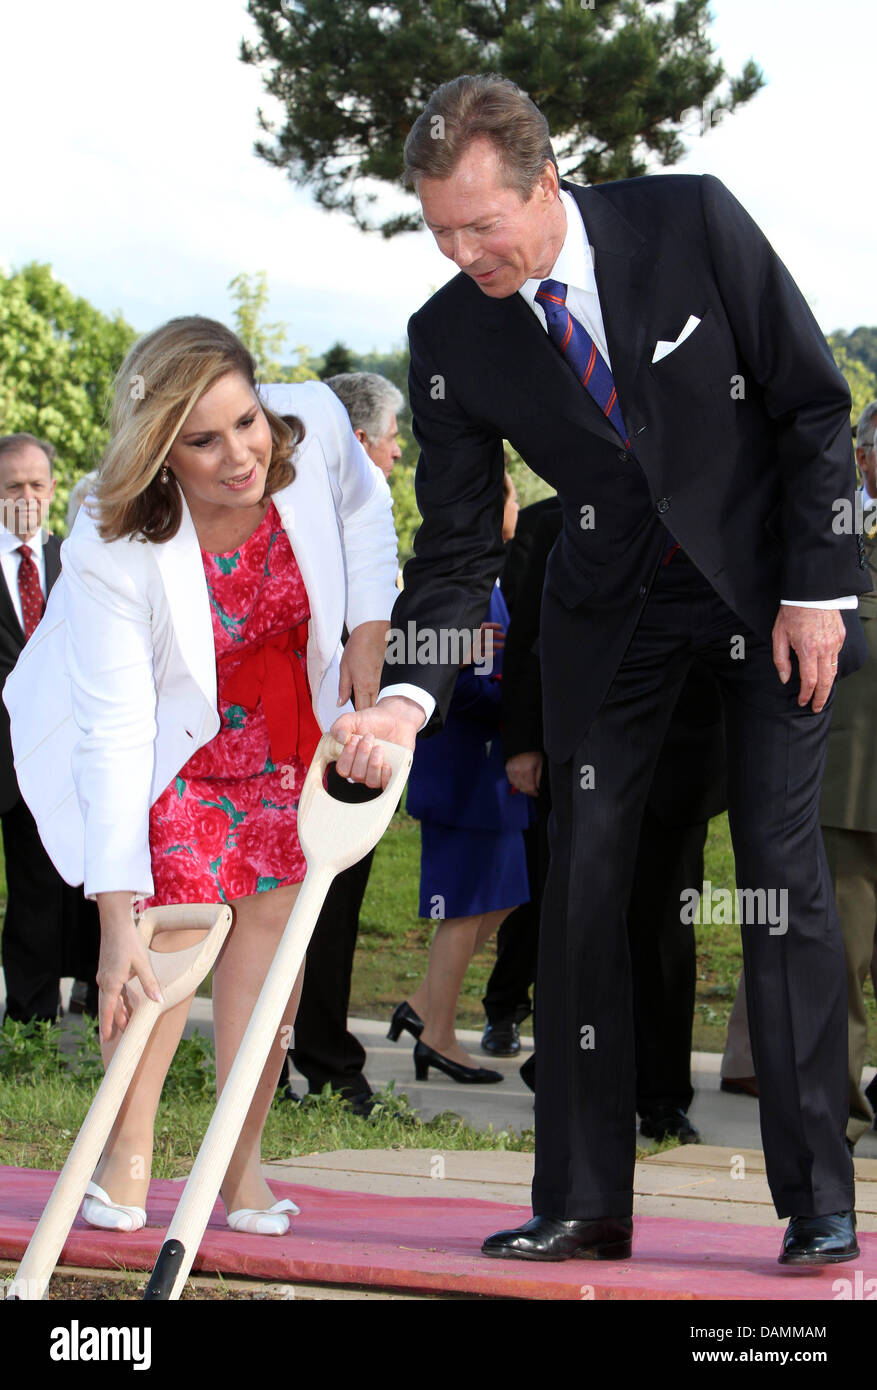 Grand Duke Henri of Luxembourg and Grand Duchess Maria Teresa of Luxembourg plant a tree during their visit to the village of Niederanven, Luxembourg, 22 June 2011. The   Grand Ducal family are attending the celebrations for the National Day of Luxembourg on 23 June 2011. Photo: Albert van der Werf (NETHERLANDS OUT) Stock Photo